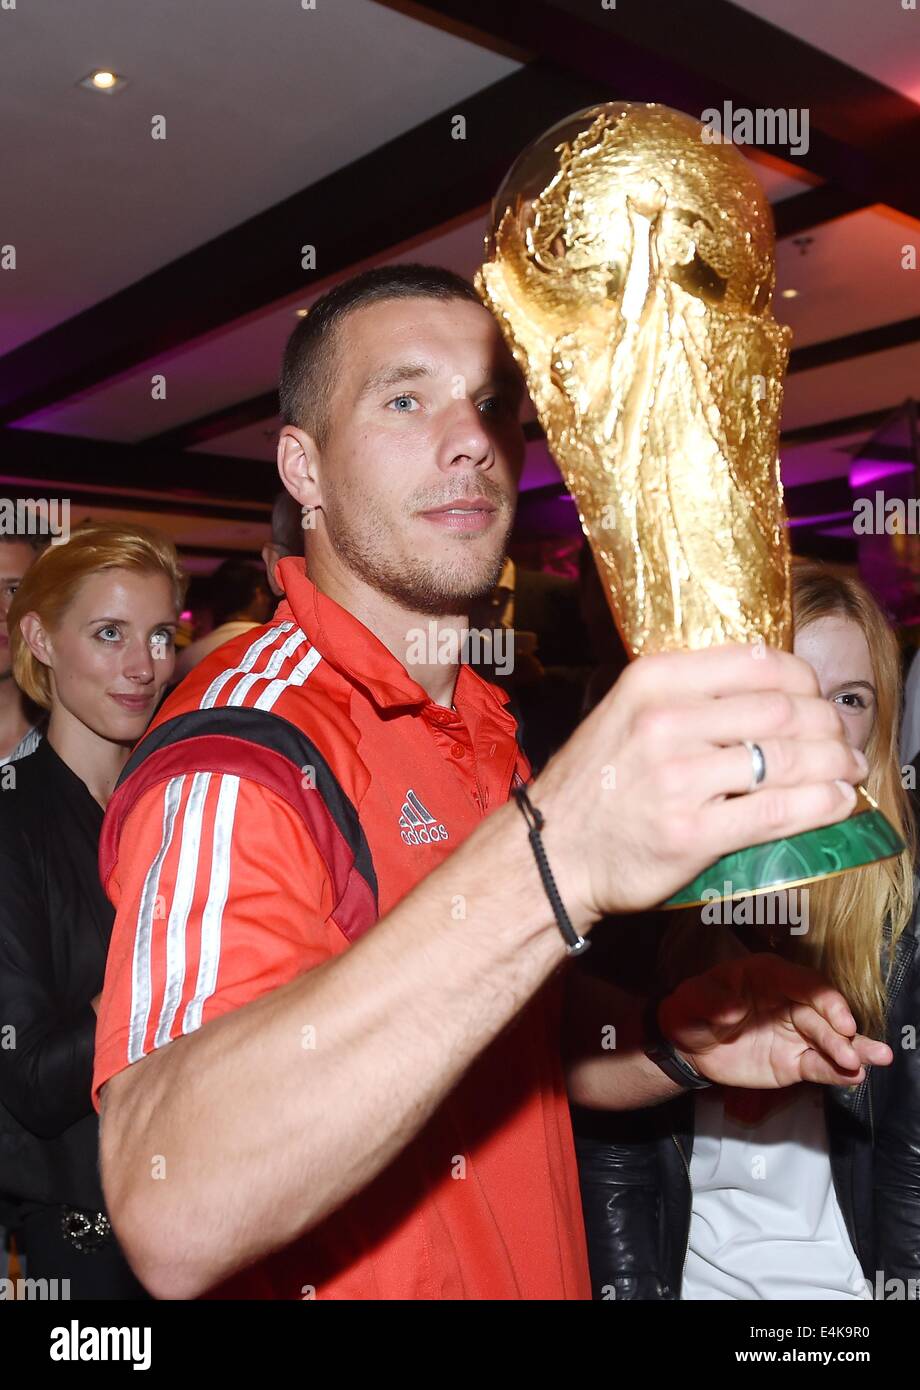 Handout: Rio de Janeiro, Brazil. 14th July, 2014. Lukas Podolski celebrating Germany's victory over Argentina in the Soccer World Cup with the trophy at Hotel Sheraton in Rio De Janeiro, Brazil on 13 July 2014. Germany won the World Cup 1-0 after defeating Argentina. (: Image for in connection with the current reporting on the World Cup and together with the source: Photo: Markus Gilliar/DFB/dpa.) Credit:  dpa picture alliance/Alamy Live News Stock Photo